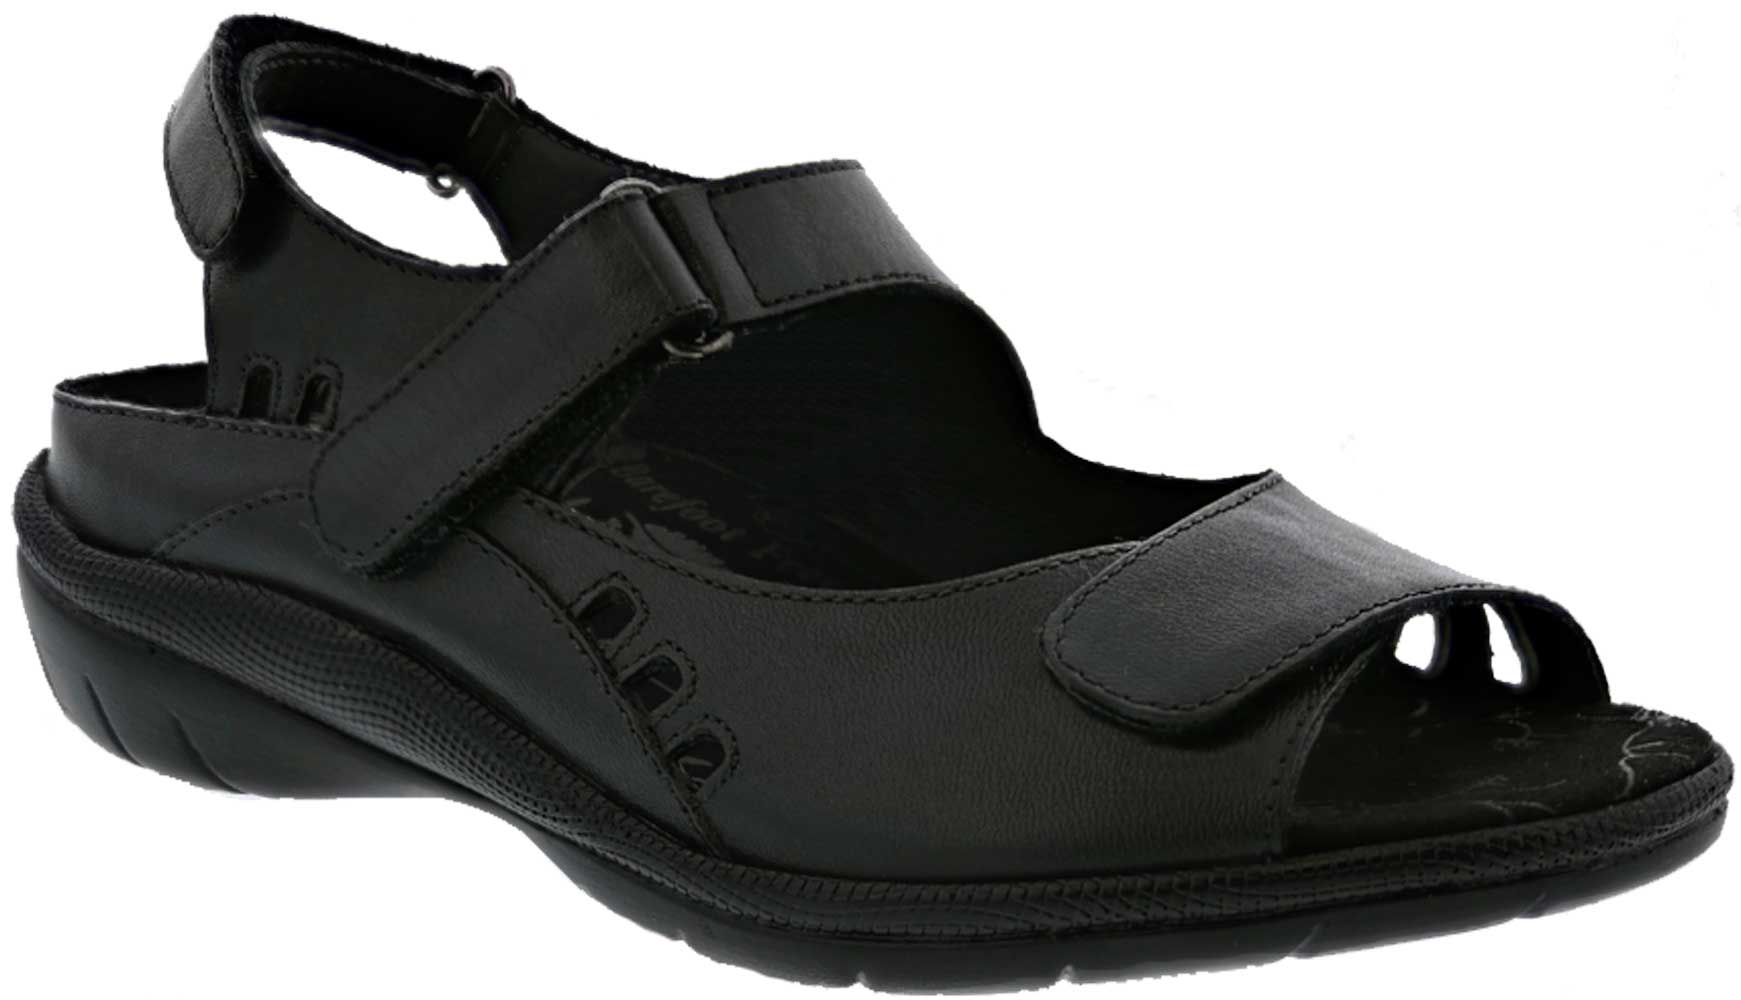 Drew Shoes Tide 17362 - Women's Casual Comfort Therapeutic Sandal